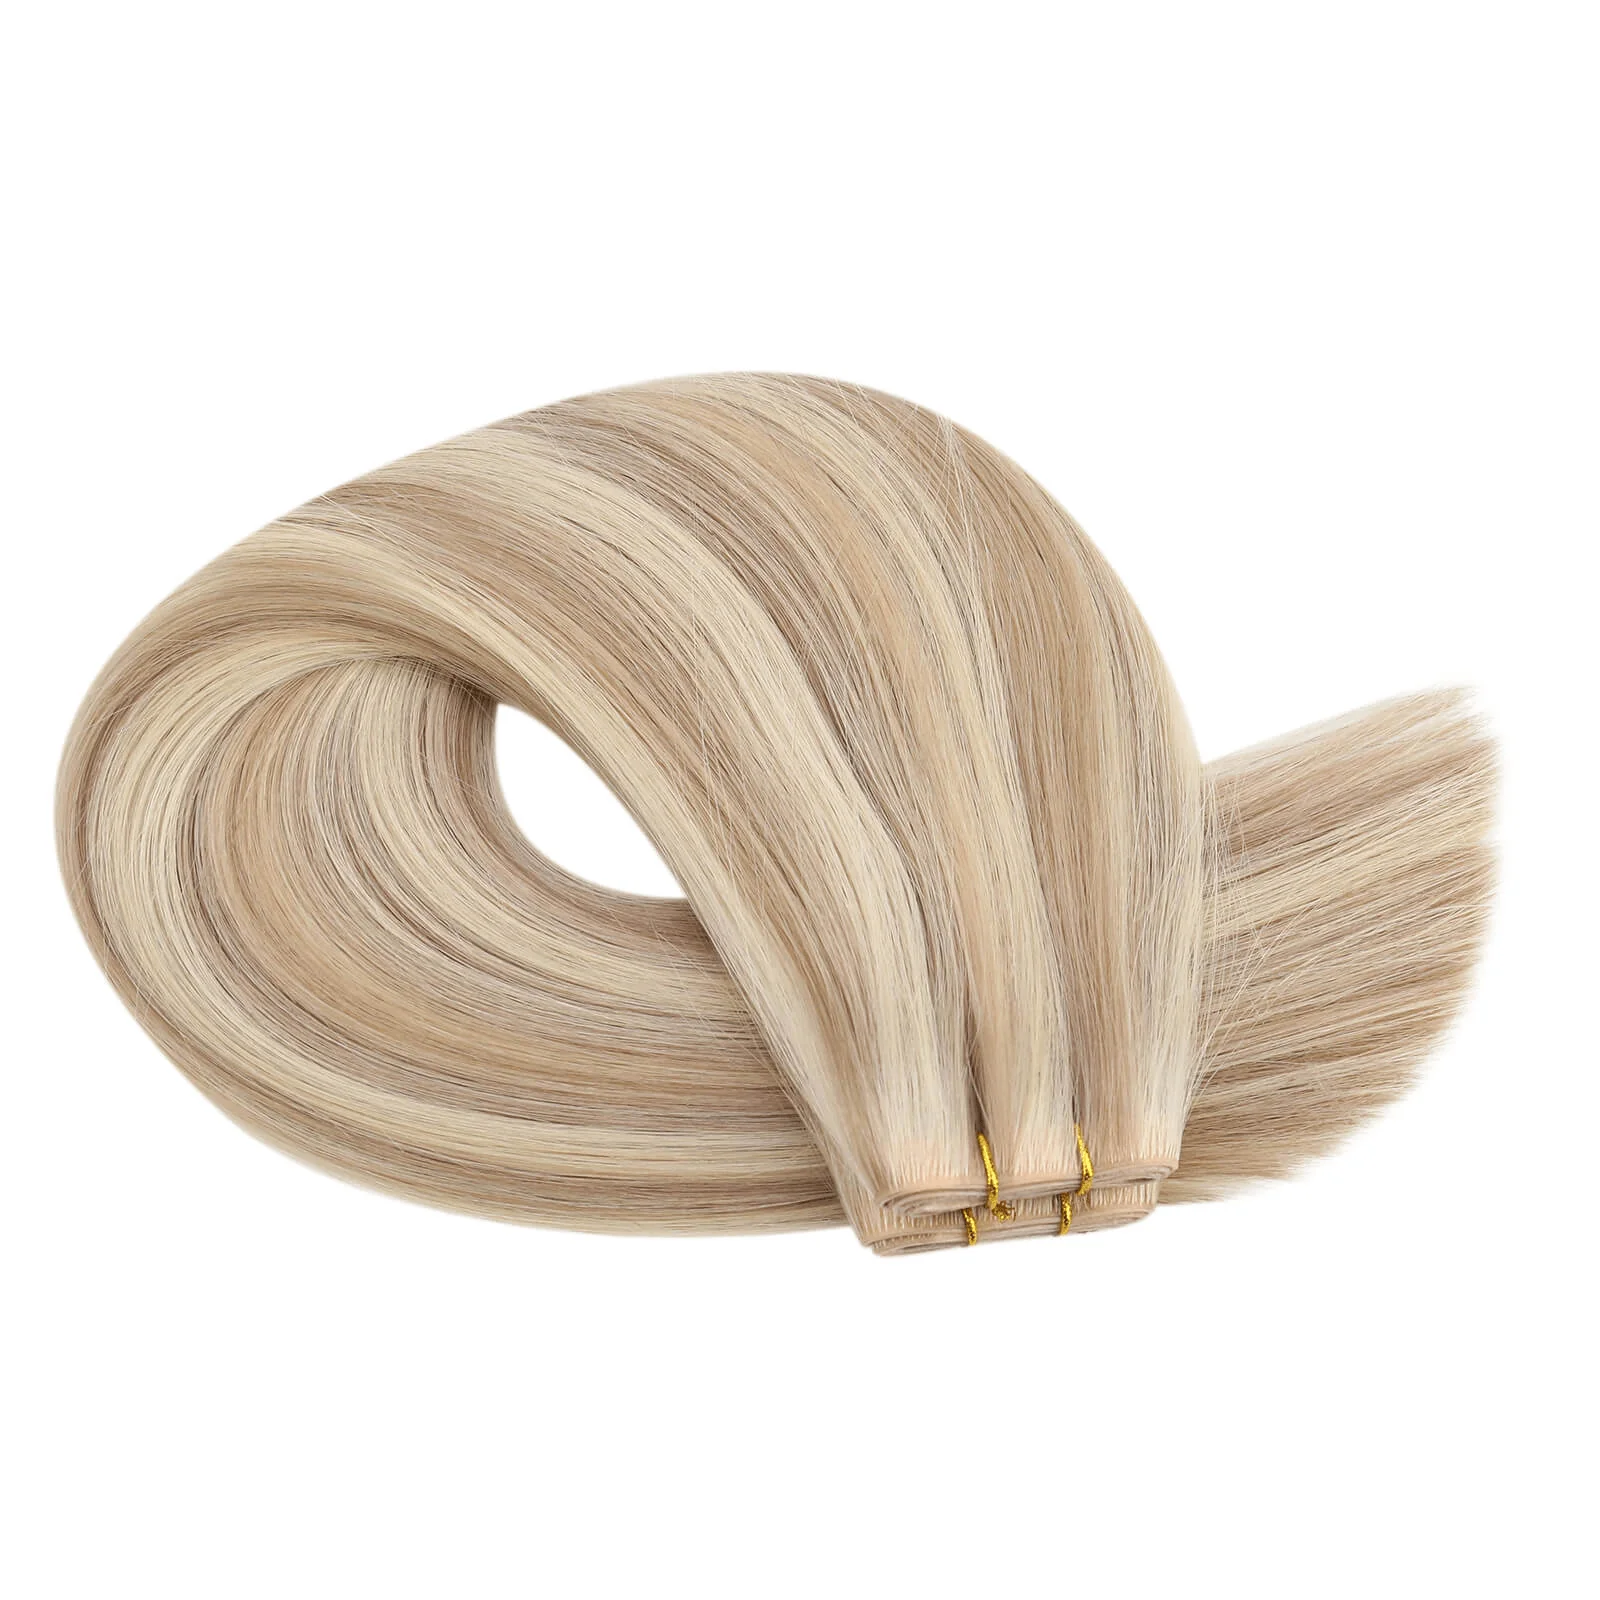 PU Hole Flat Weft Extensions